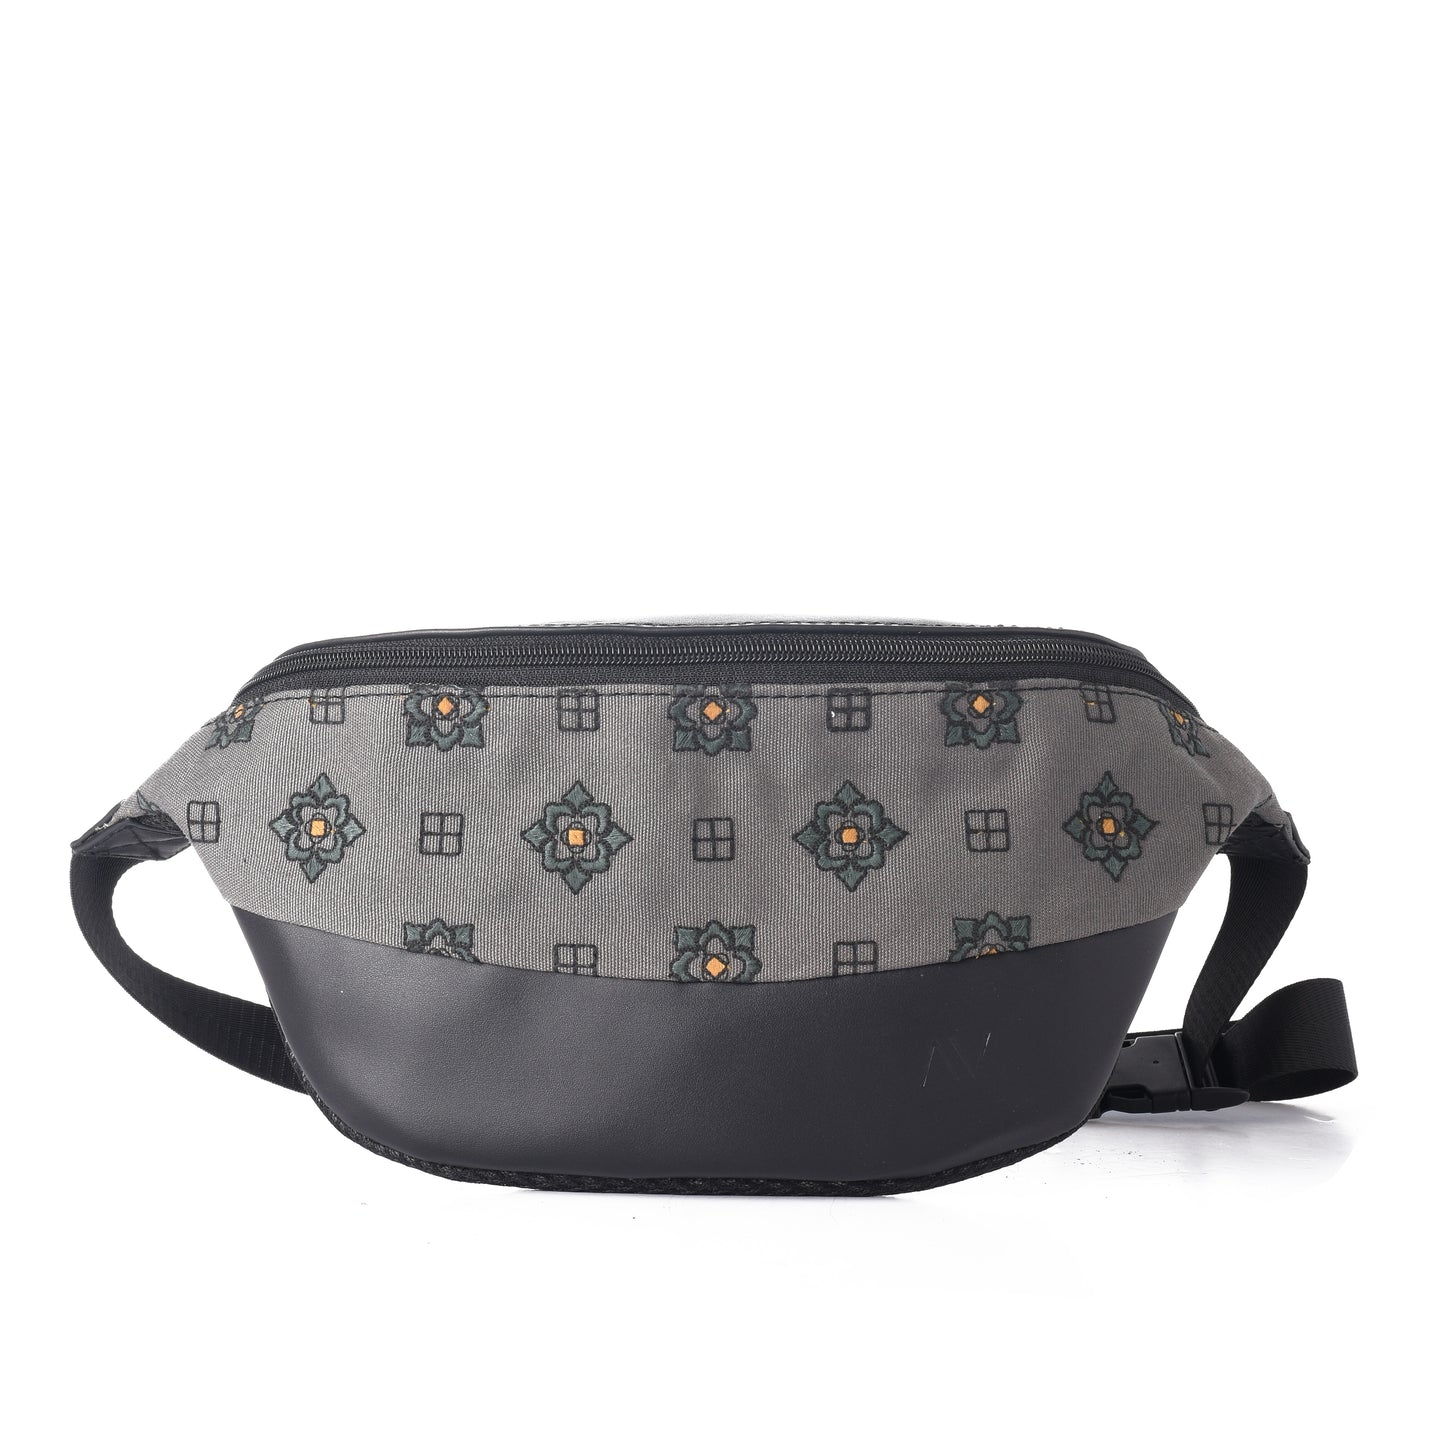 Fanny pack - Black with Olive Islamic pattern